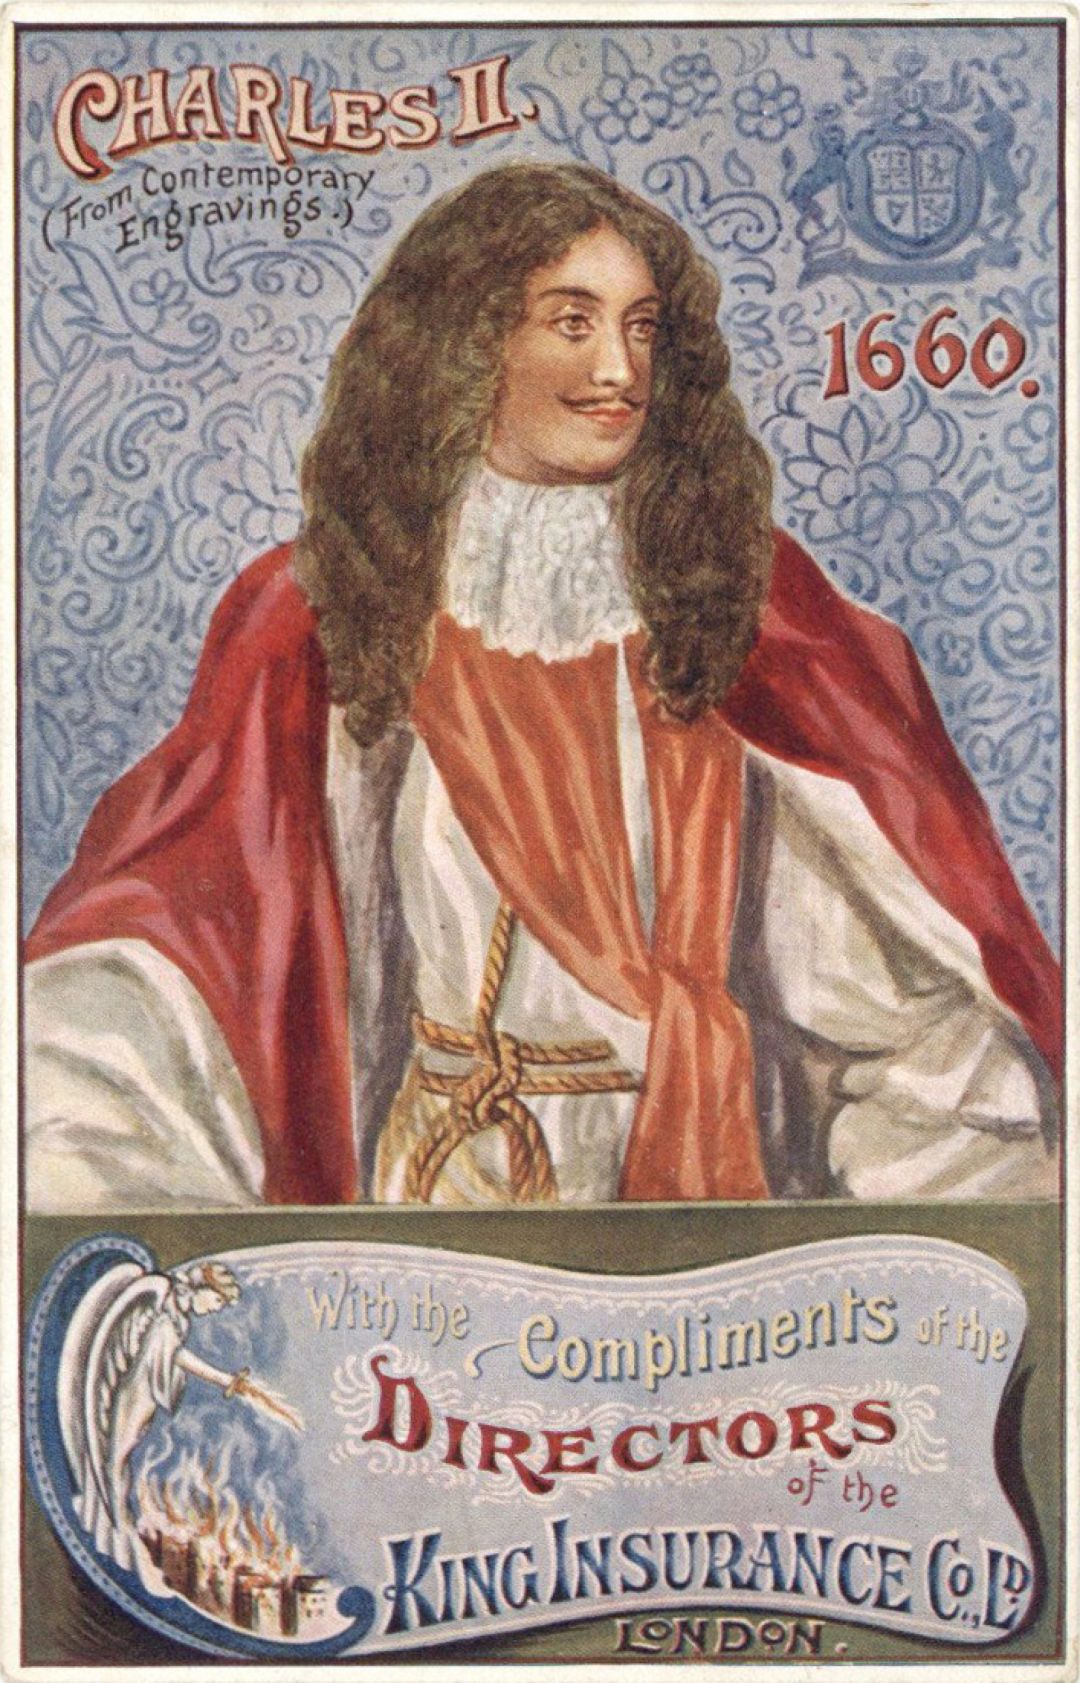 Post Card Ad for King Insurance Co. Ltd. dated 1660 -  Insurance